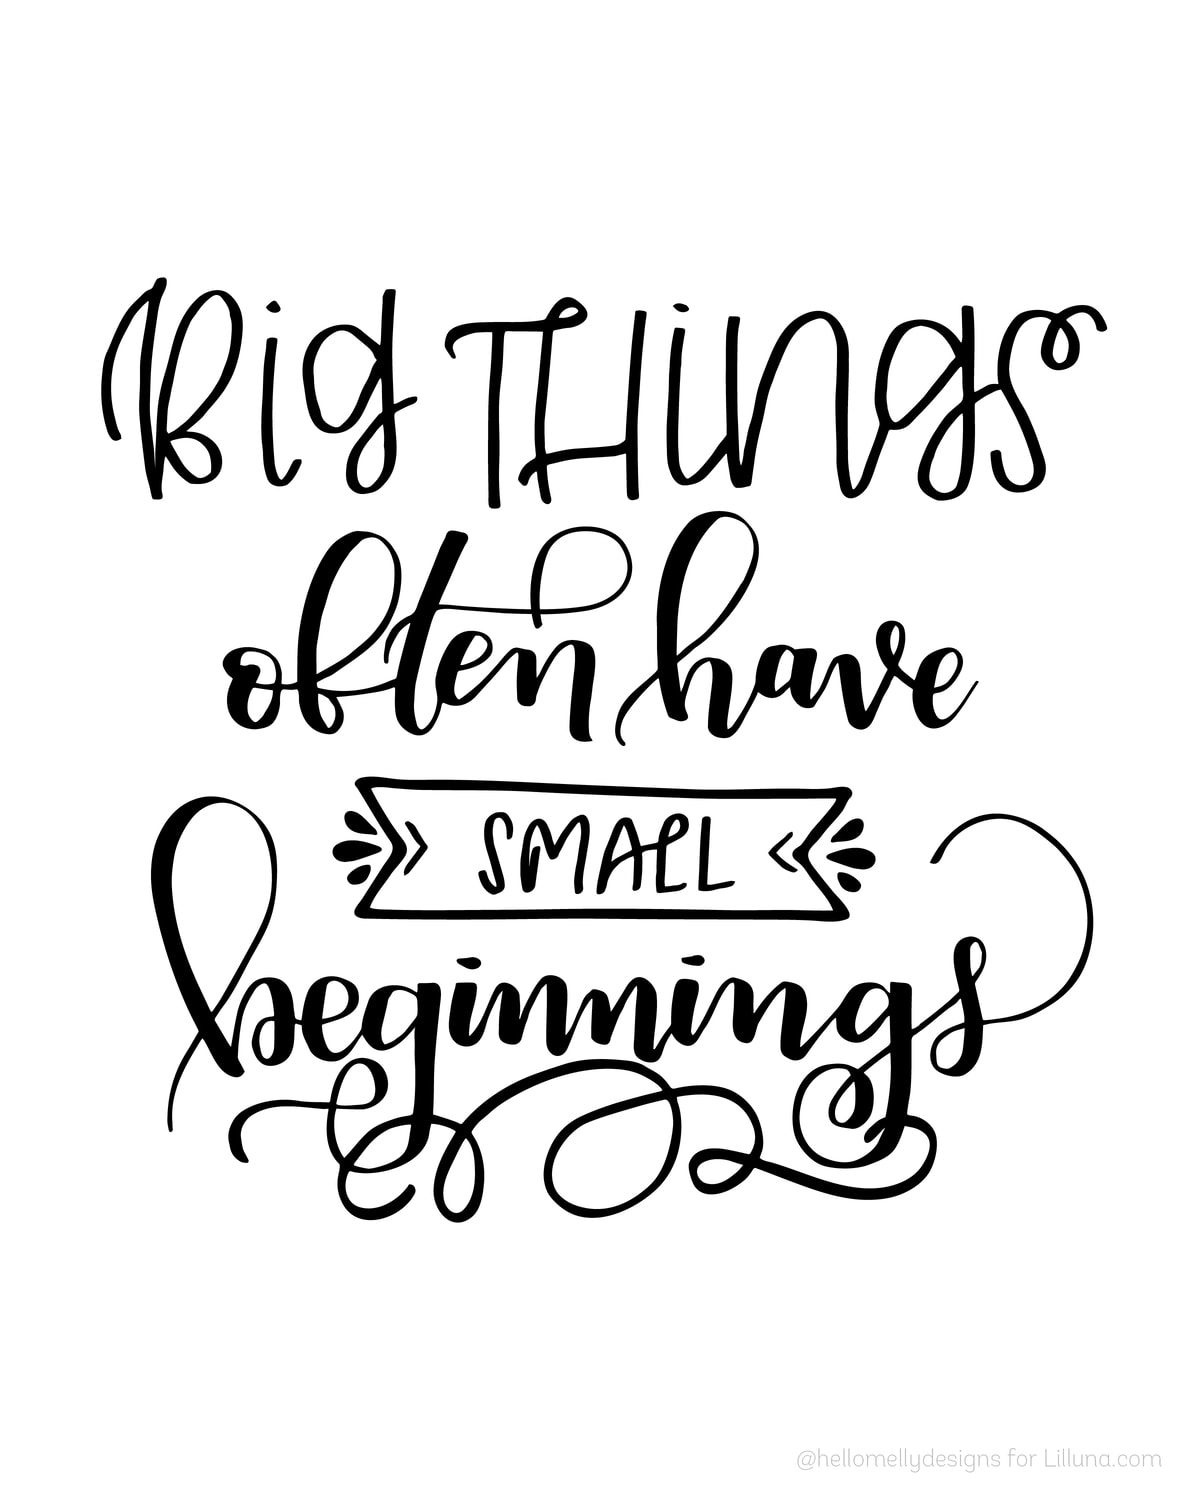 Big things often have small beginnings - LOVE this quote!! Get the free print on lilluna.com. Makes great decor, just put in a frame!